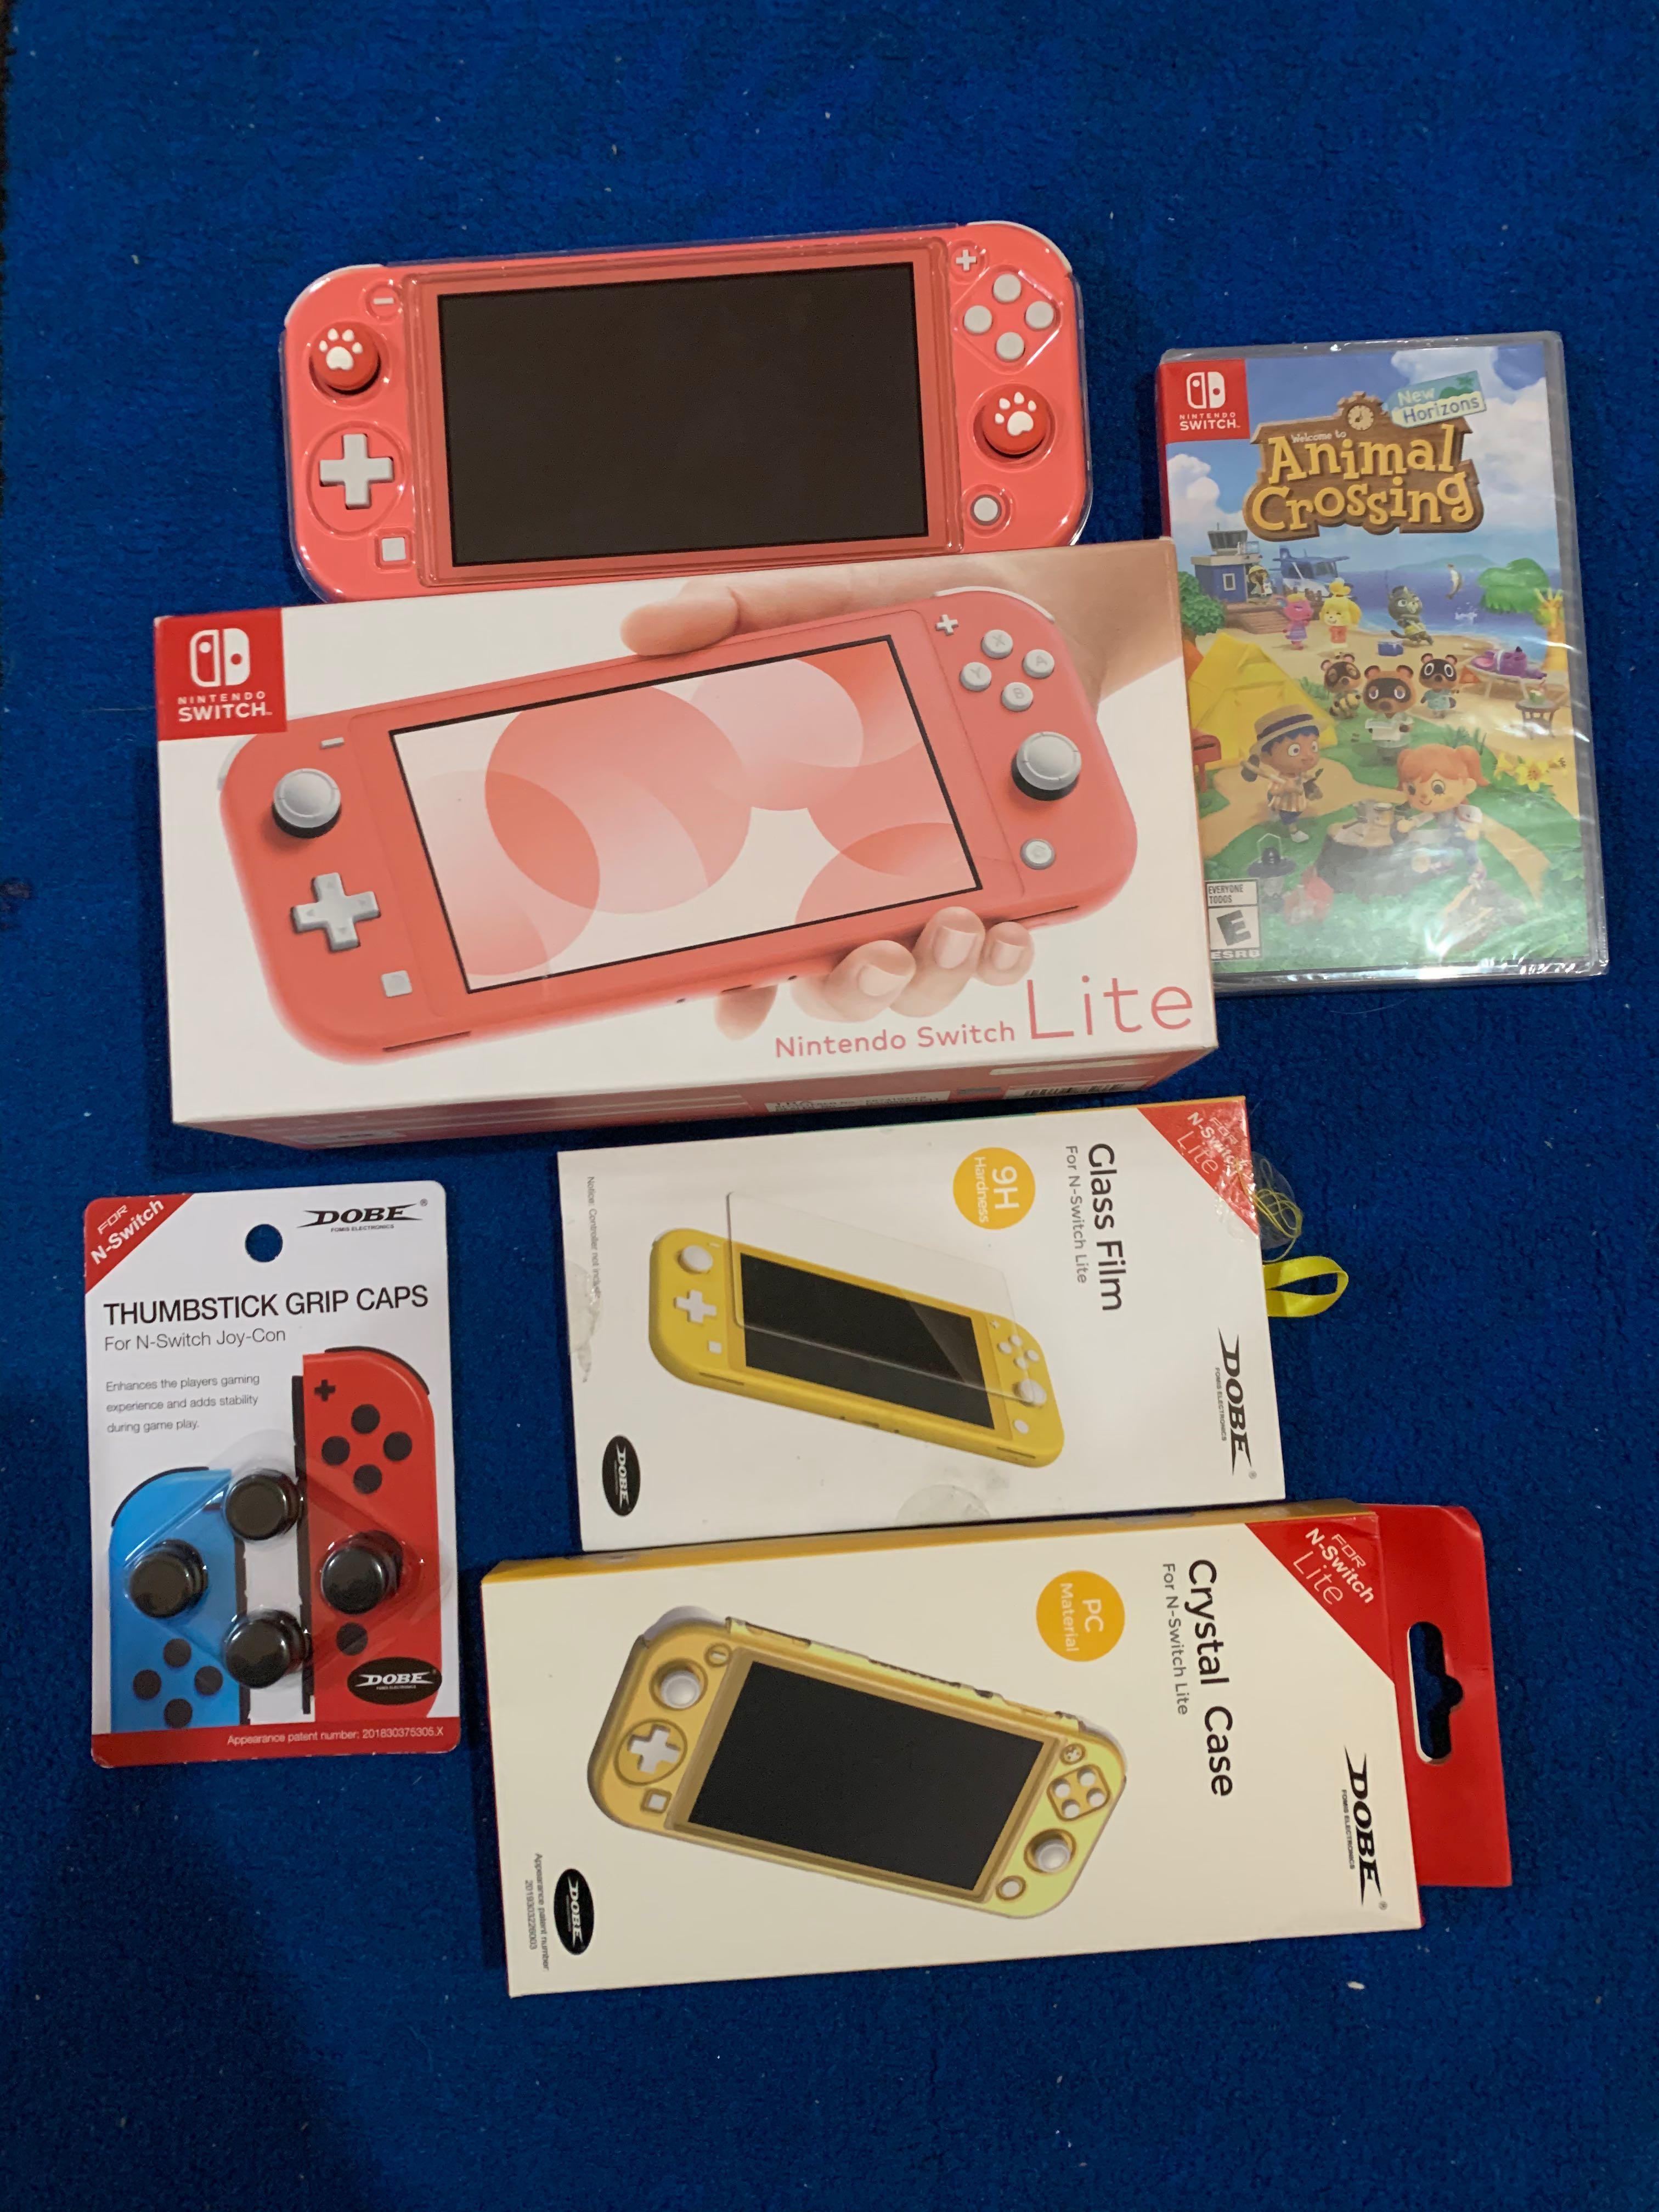 nintendo switch lite coral and animal crossing